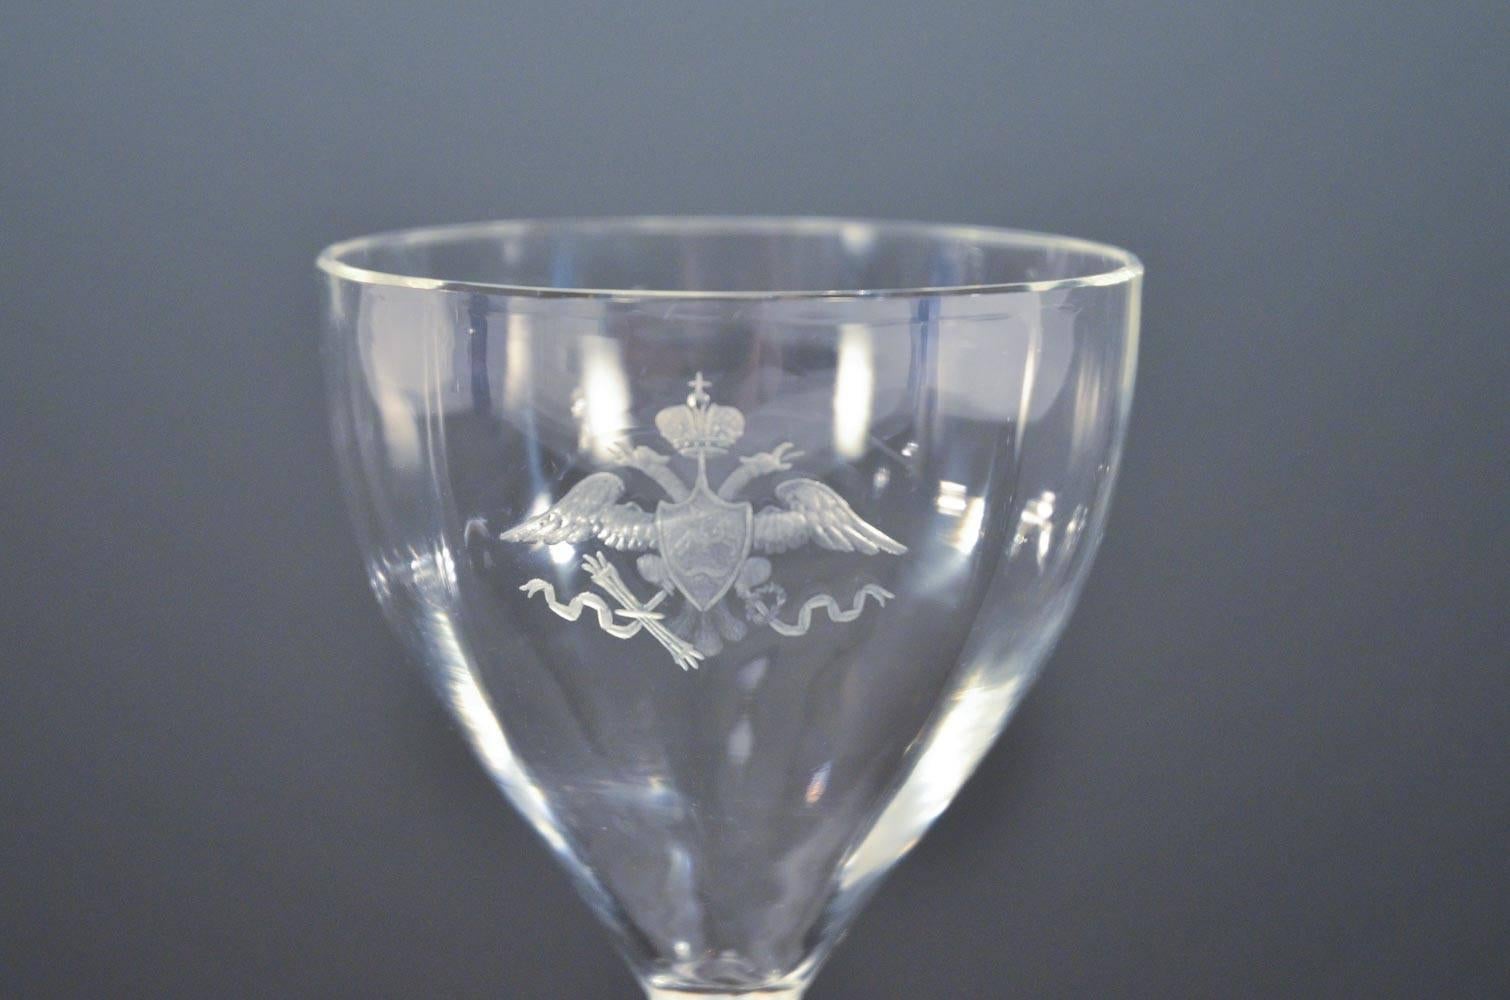 This rare Russian Imperial era blown glass wine goblet is from the Tsarskoe Selo Palace (??????? ???? – Tsar’s Village) of Tsar Nicholas II.

Hand blown by the Maltsev Glass Factory from the period of Nicholas II, the bowl is engraved with the